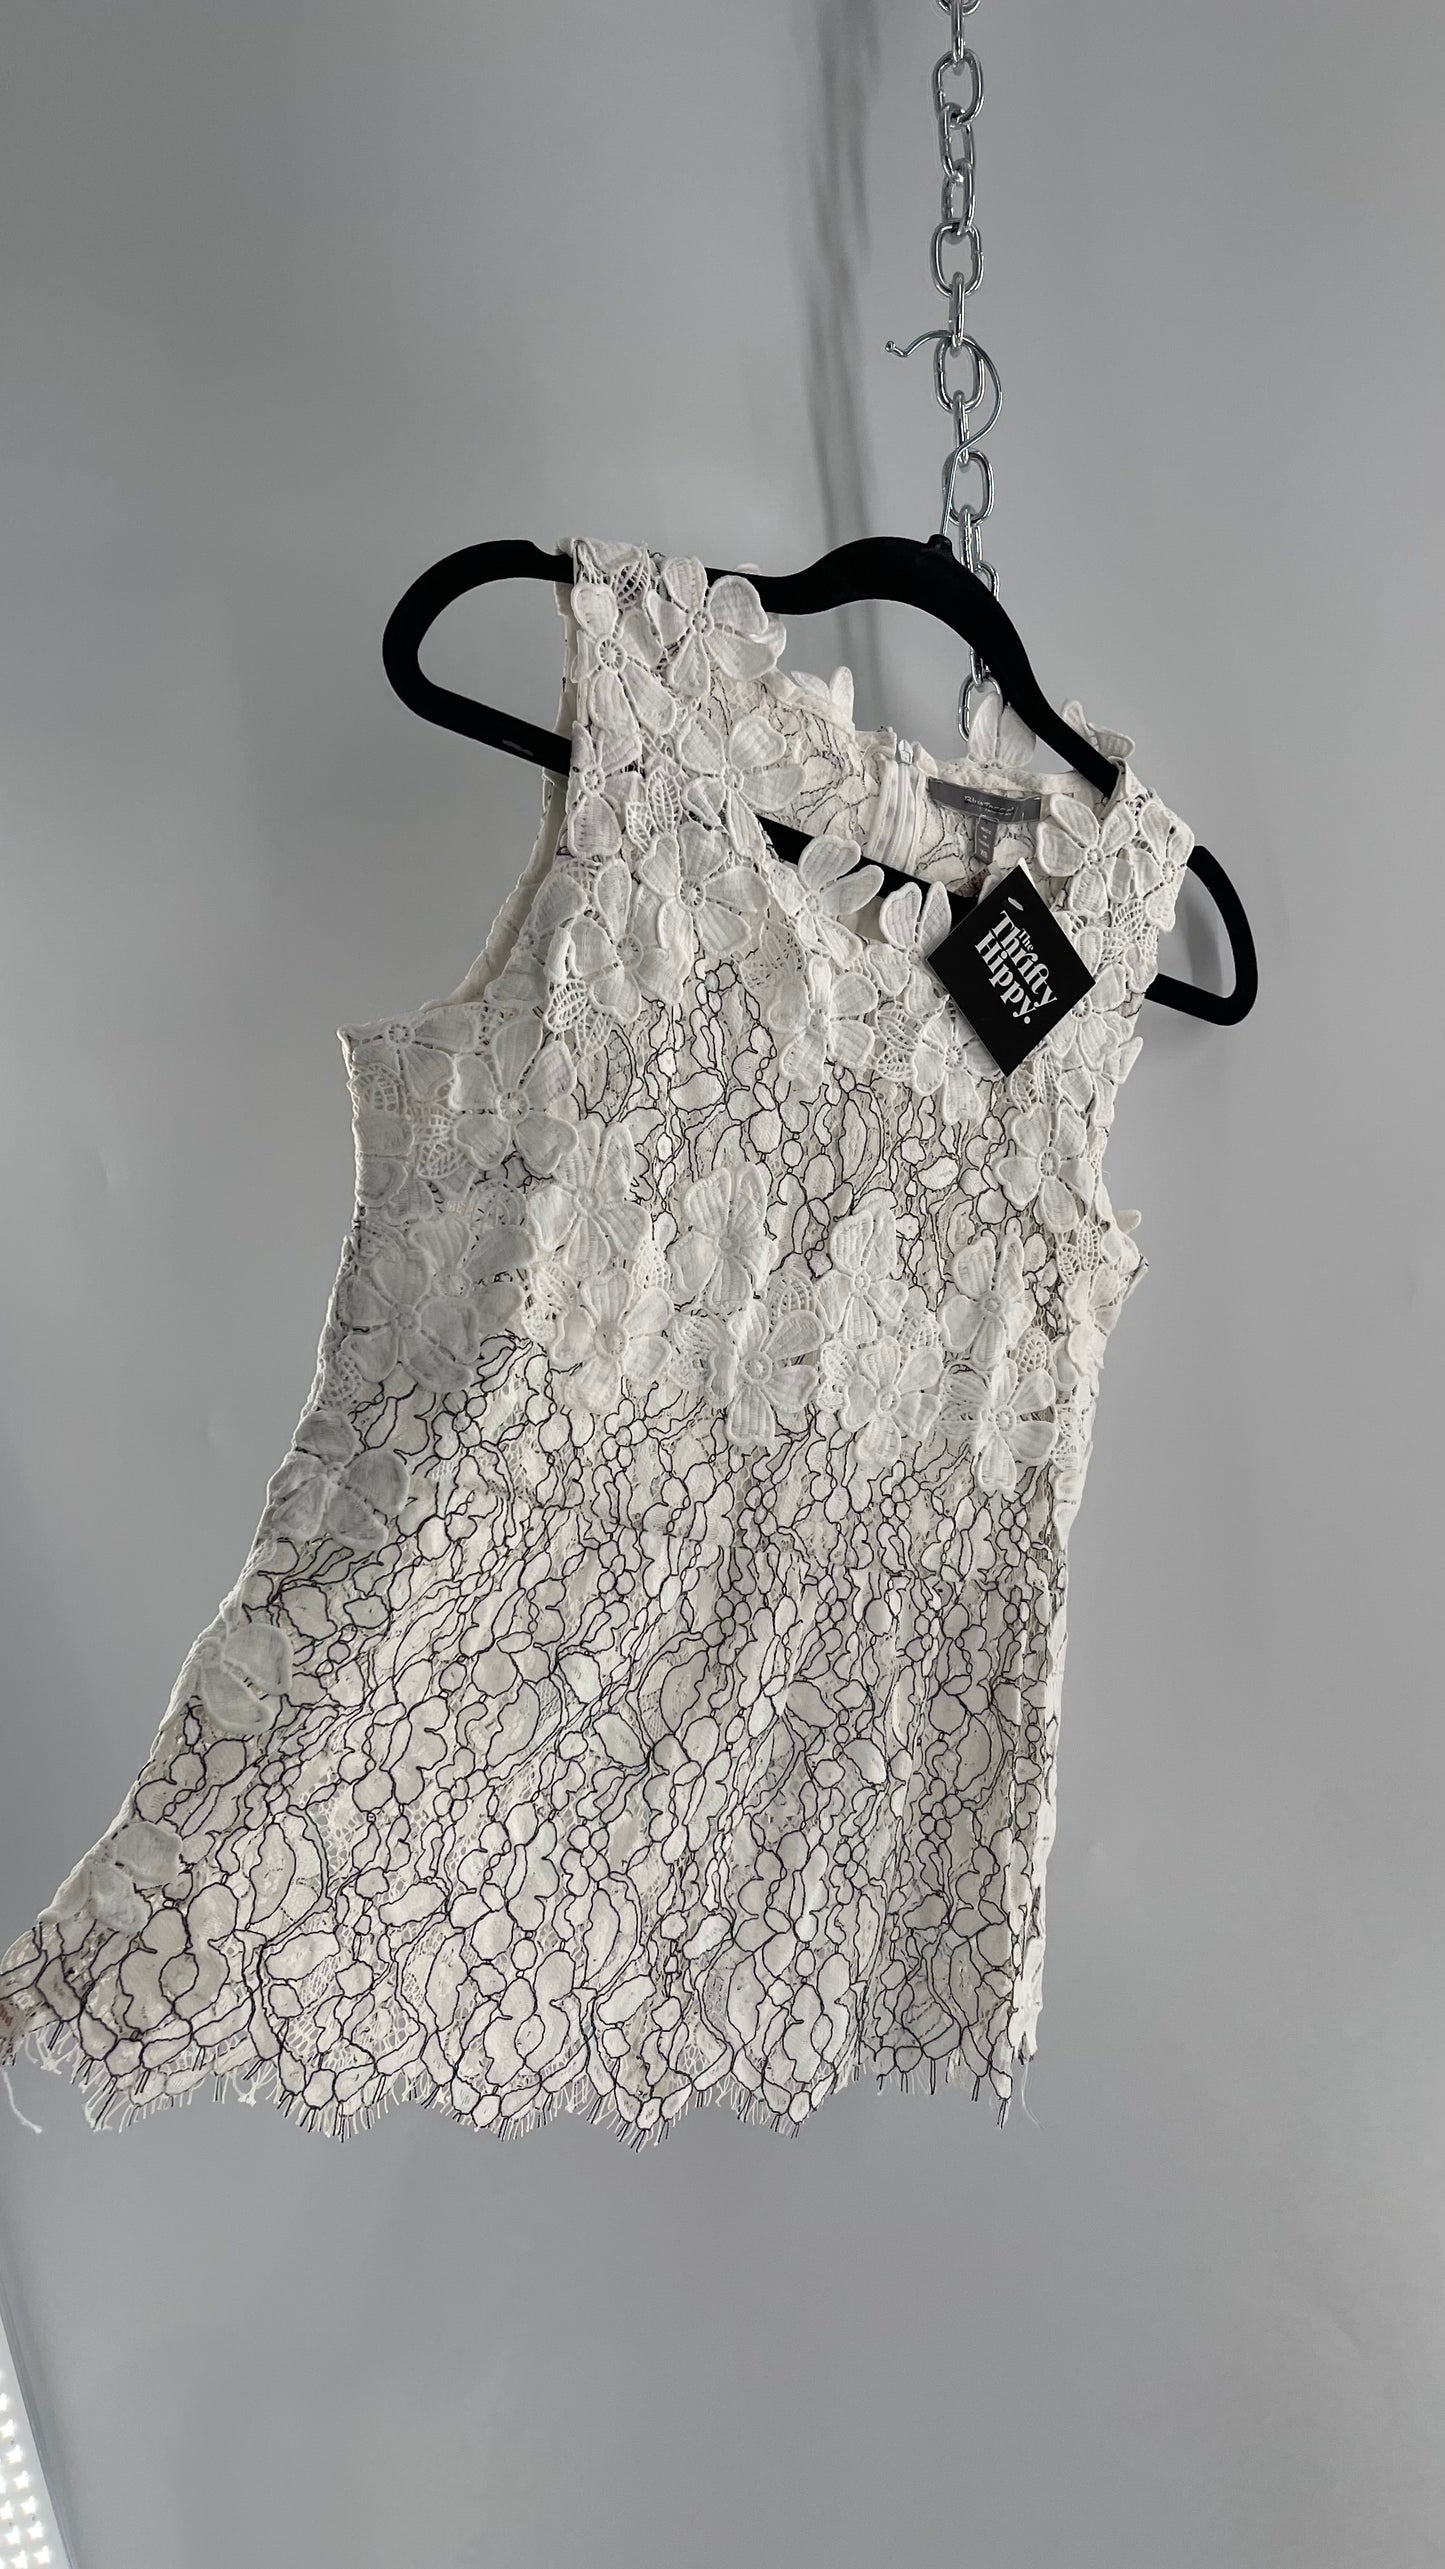 Anthropologie Blue Tassel White Lace Tank with White Lace Under bust and Collar Trim (XS)